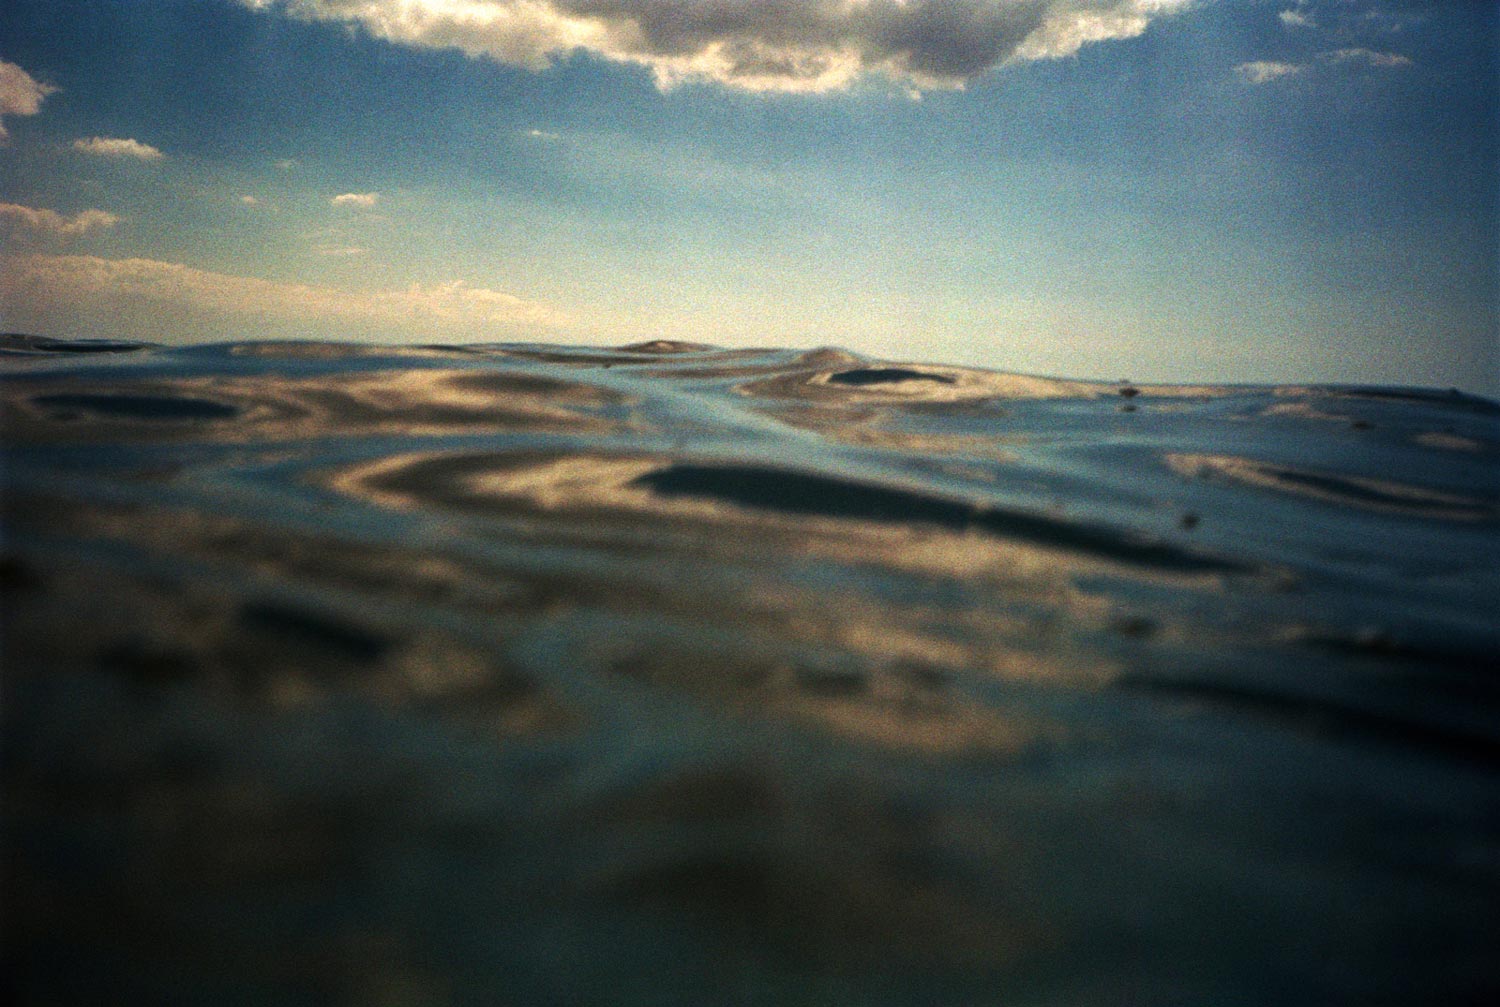 Speed boat on the open sea at sunset, analogue photography.